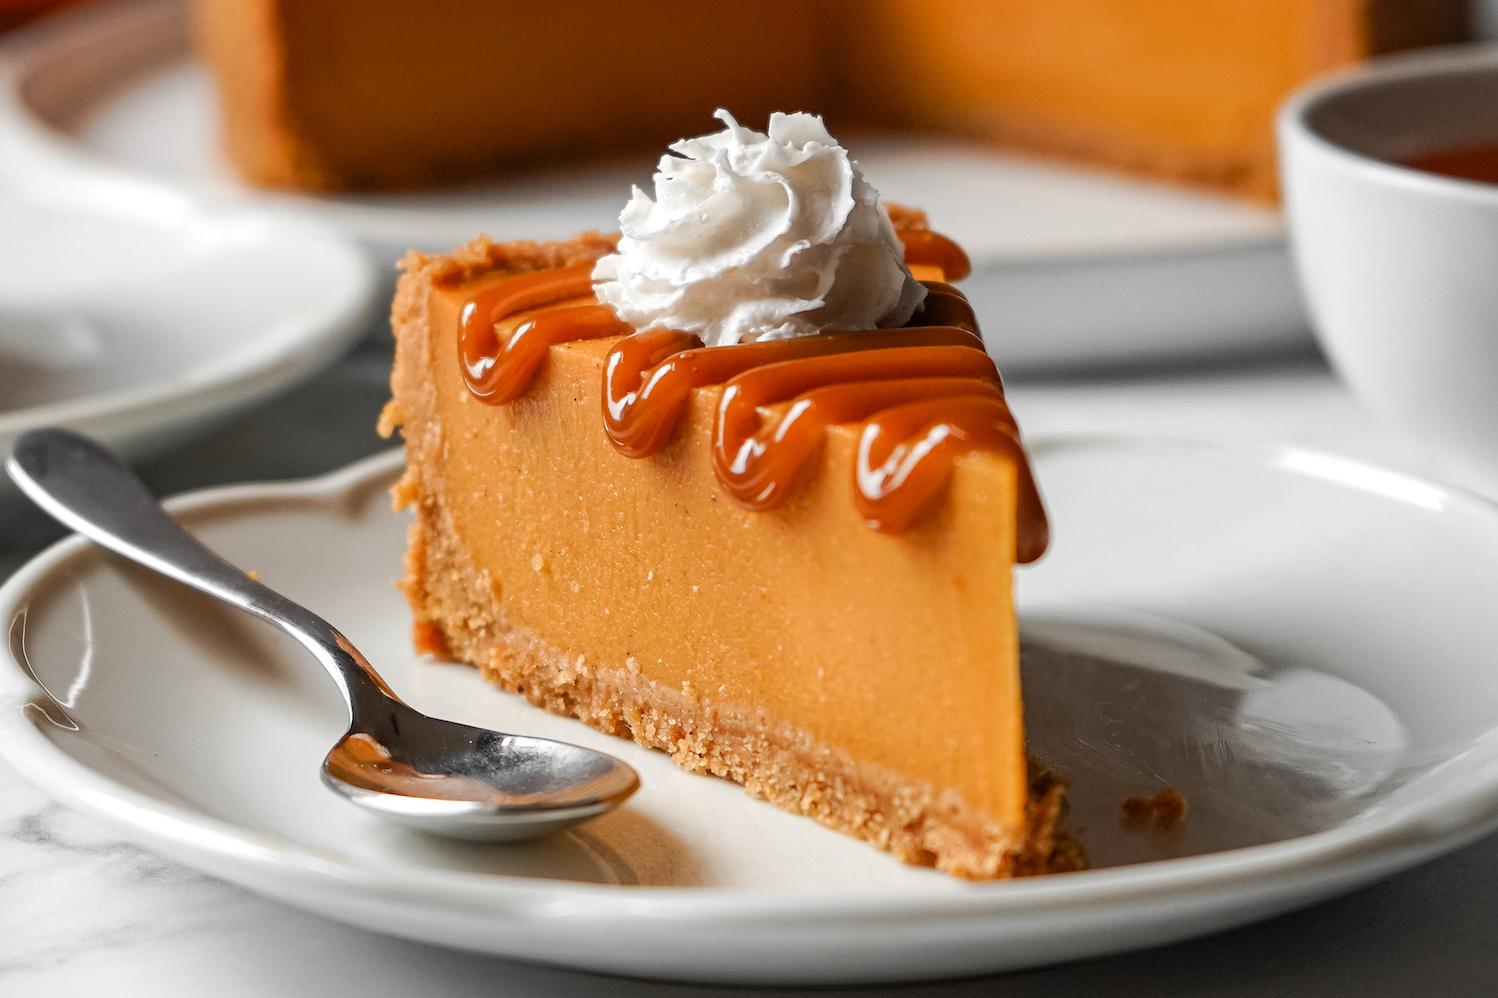  This pumpkin cheesecake is simply irresistible!